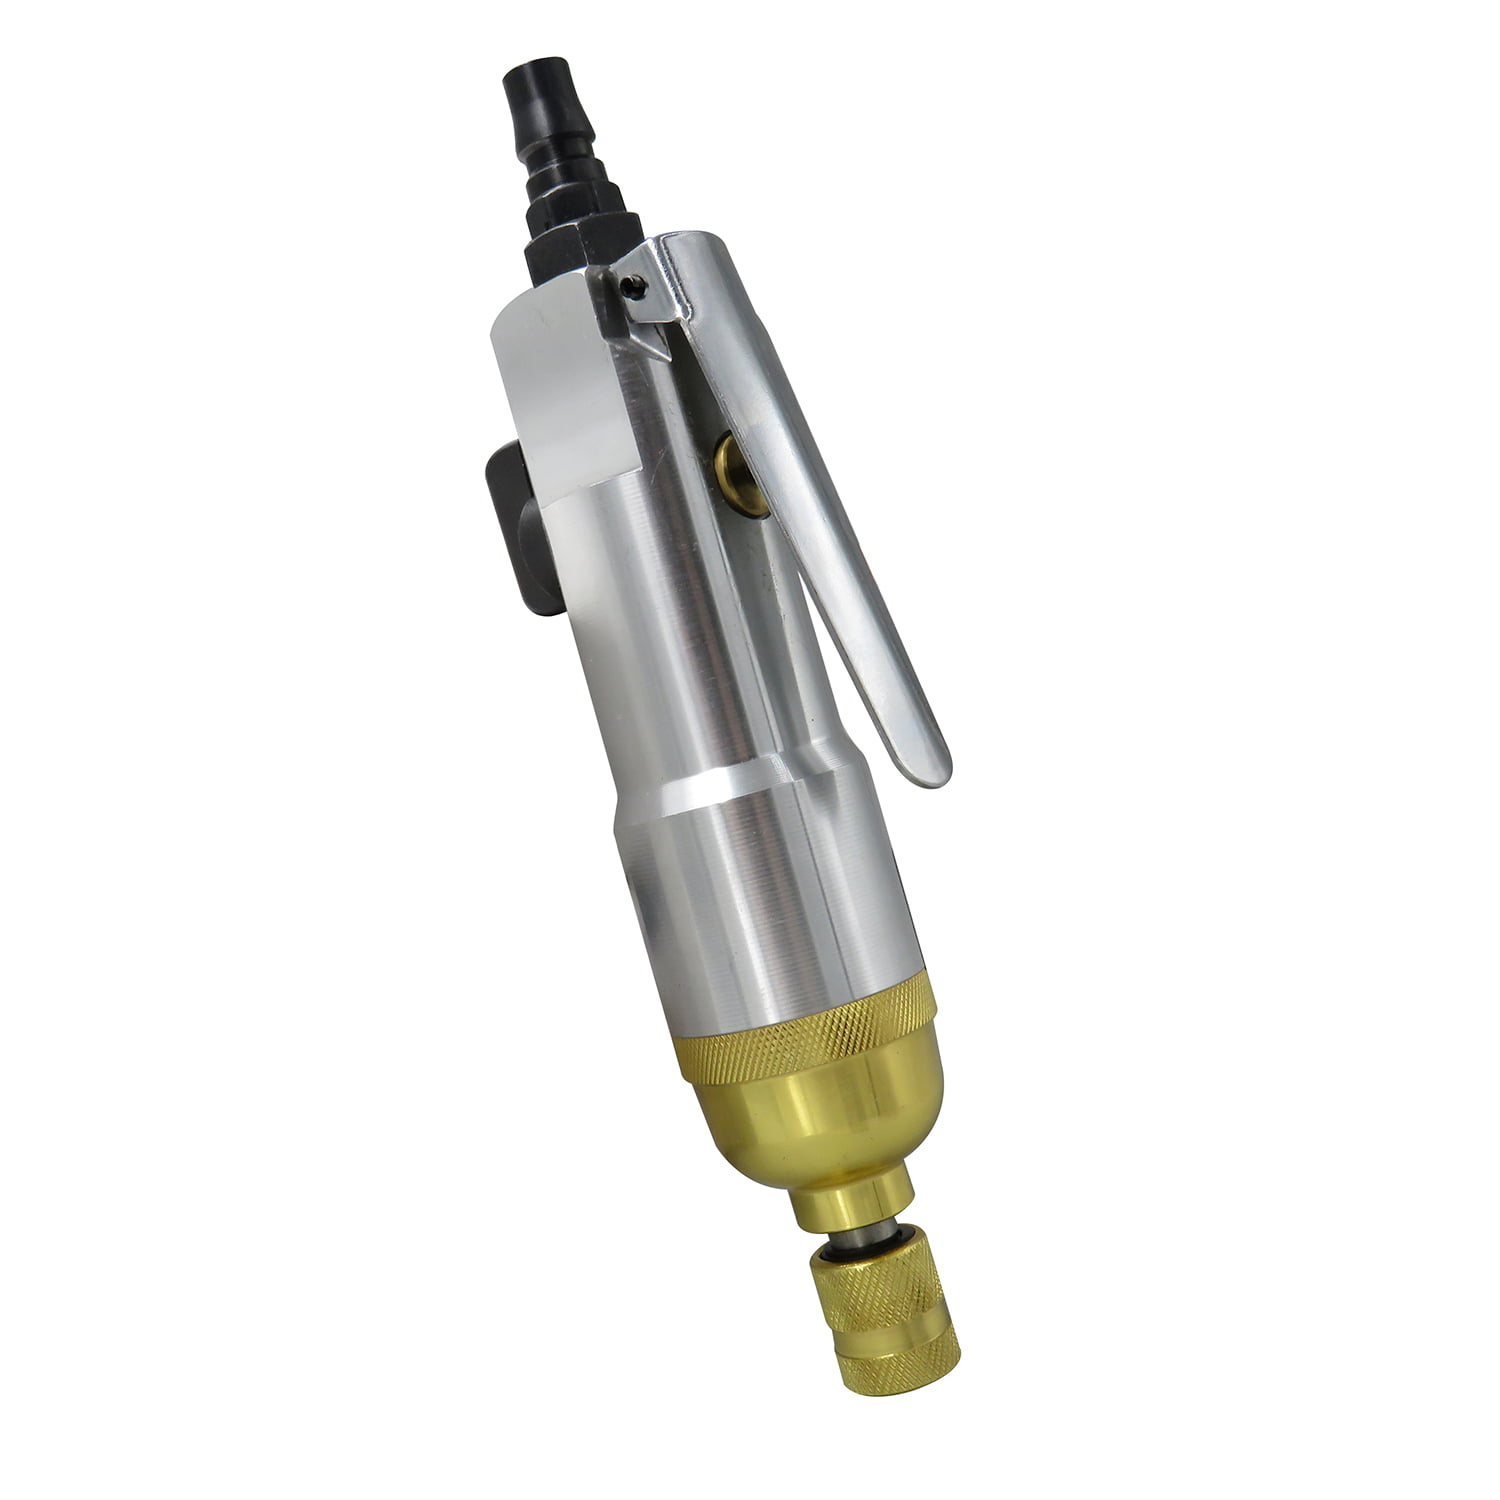 Pneumatic Screwdriver 1/4 Pneumatic Air Screwdriver Straight Hand Industrial 9000rpm Reversible Screw Driver-High Efficiency/Low Noise 